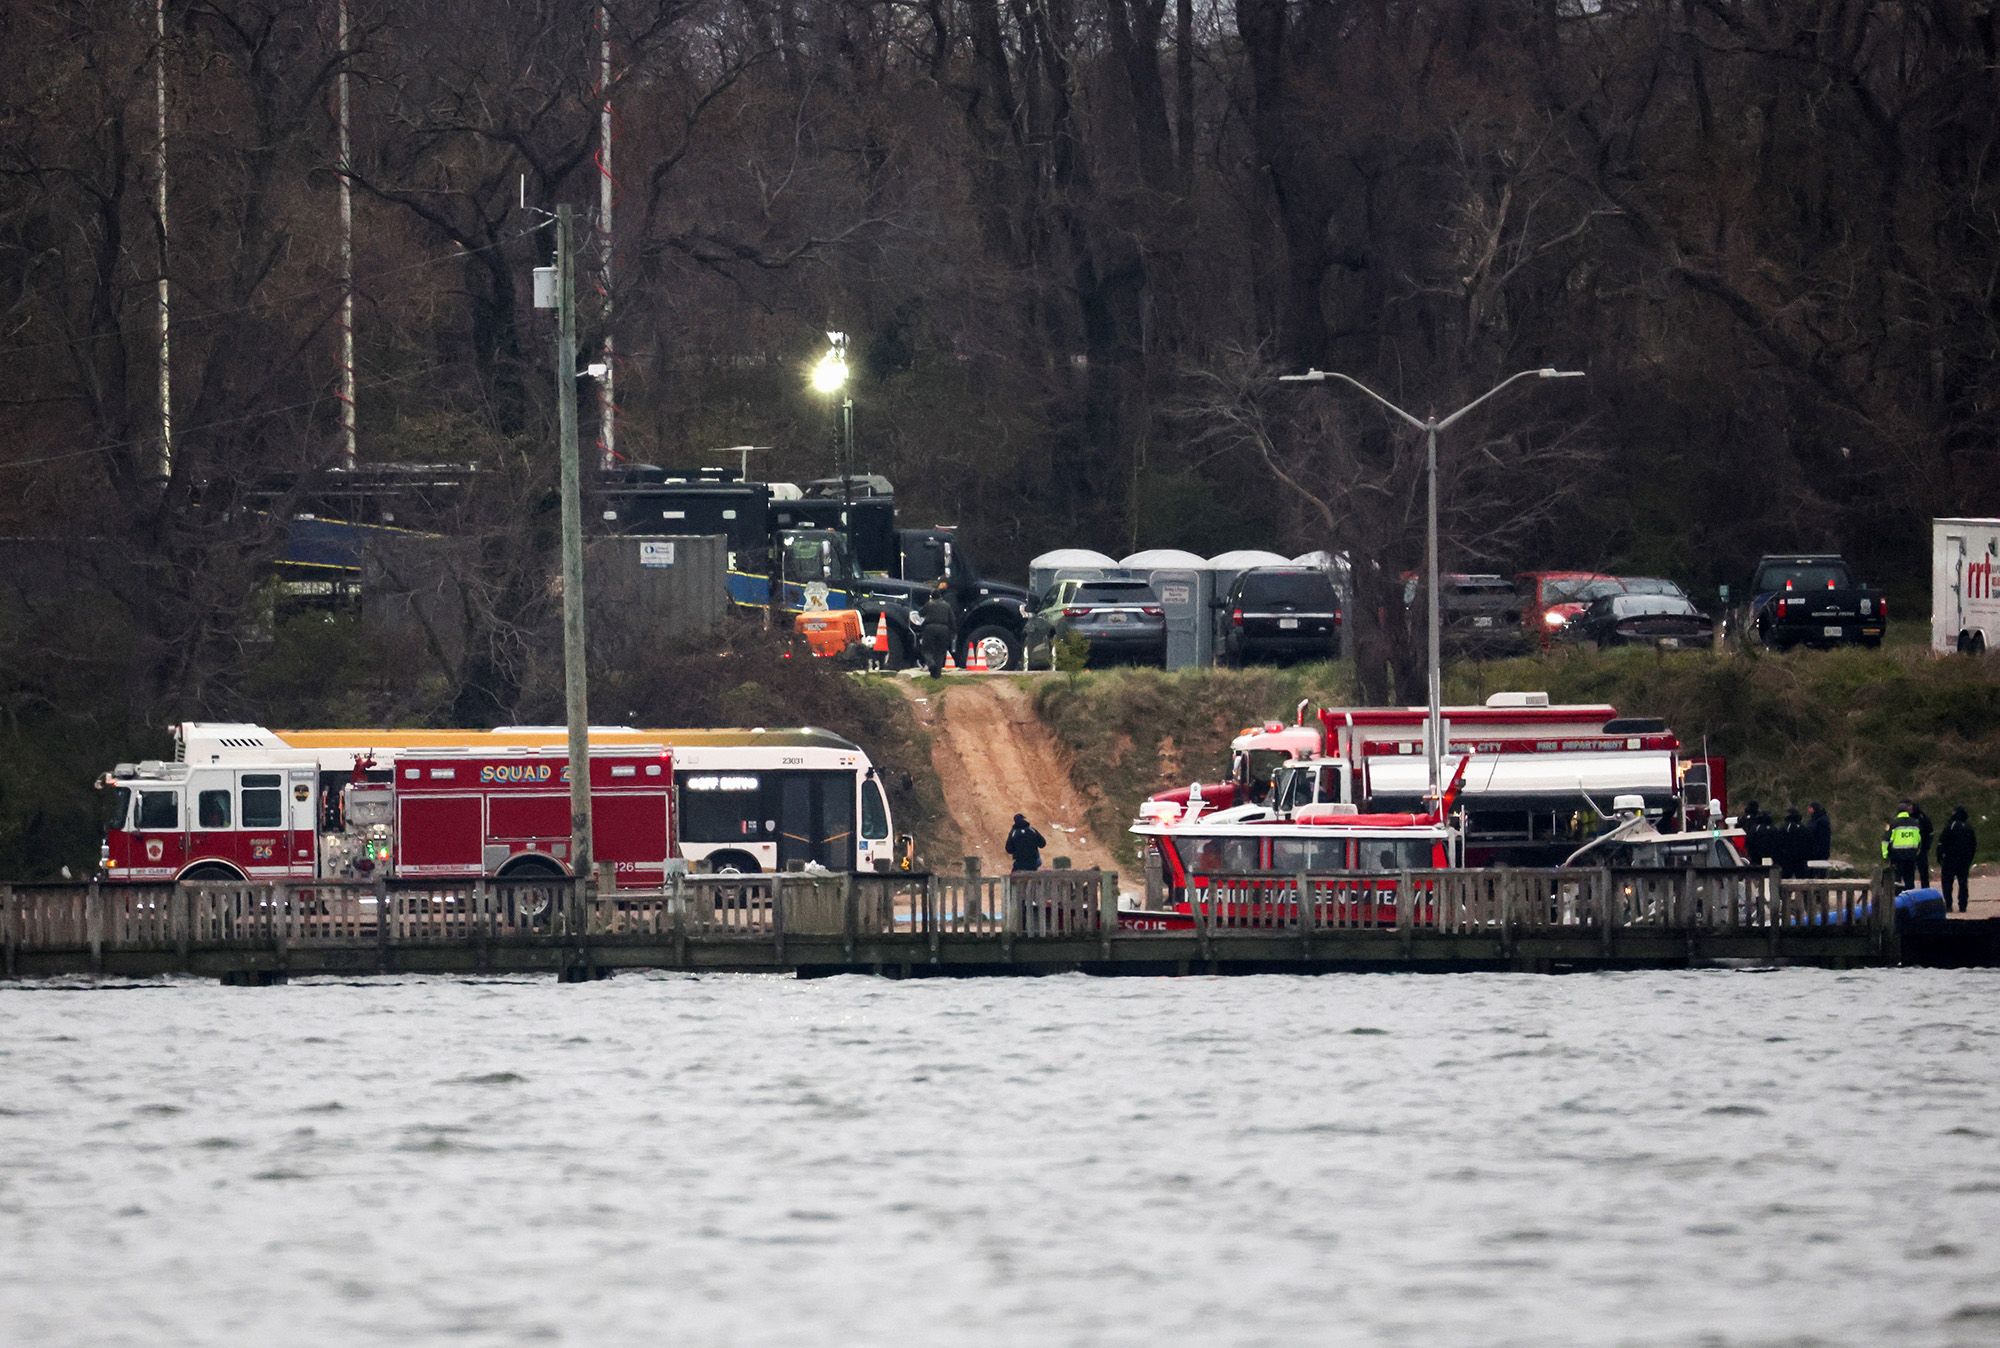 Emergency vehicles are parked near the scene of the Francis Scott Key Bridge collapse in Baltimore, Maryland, on March 27.